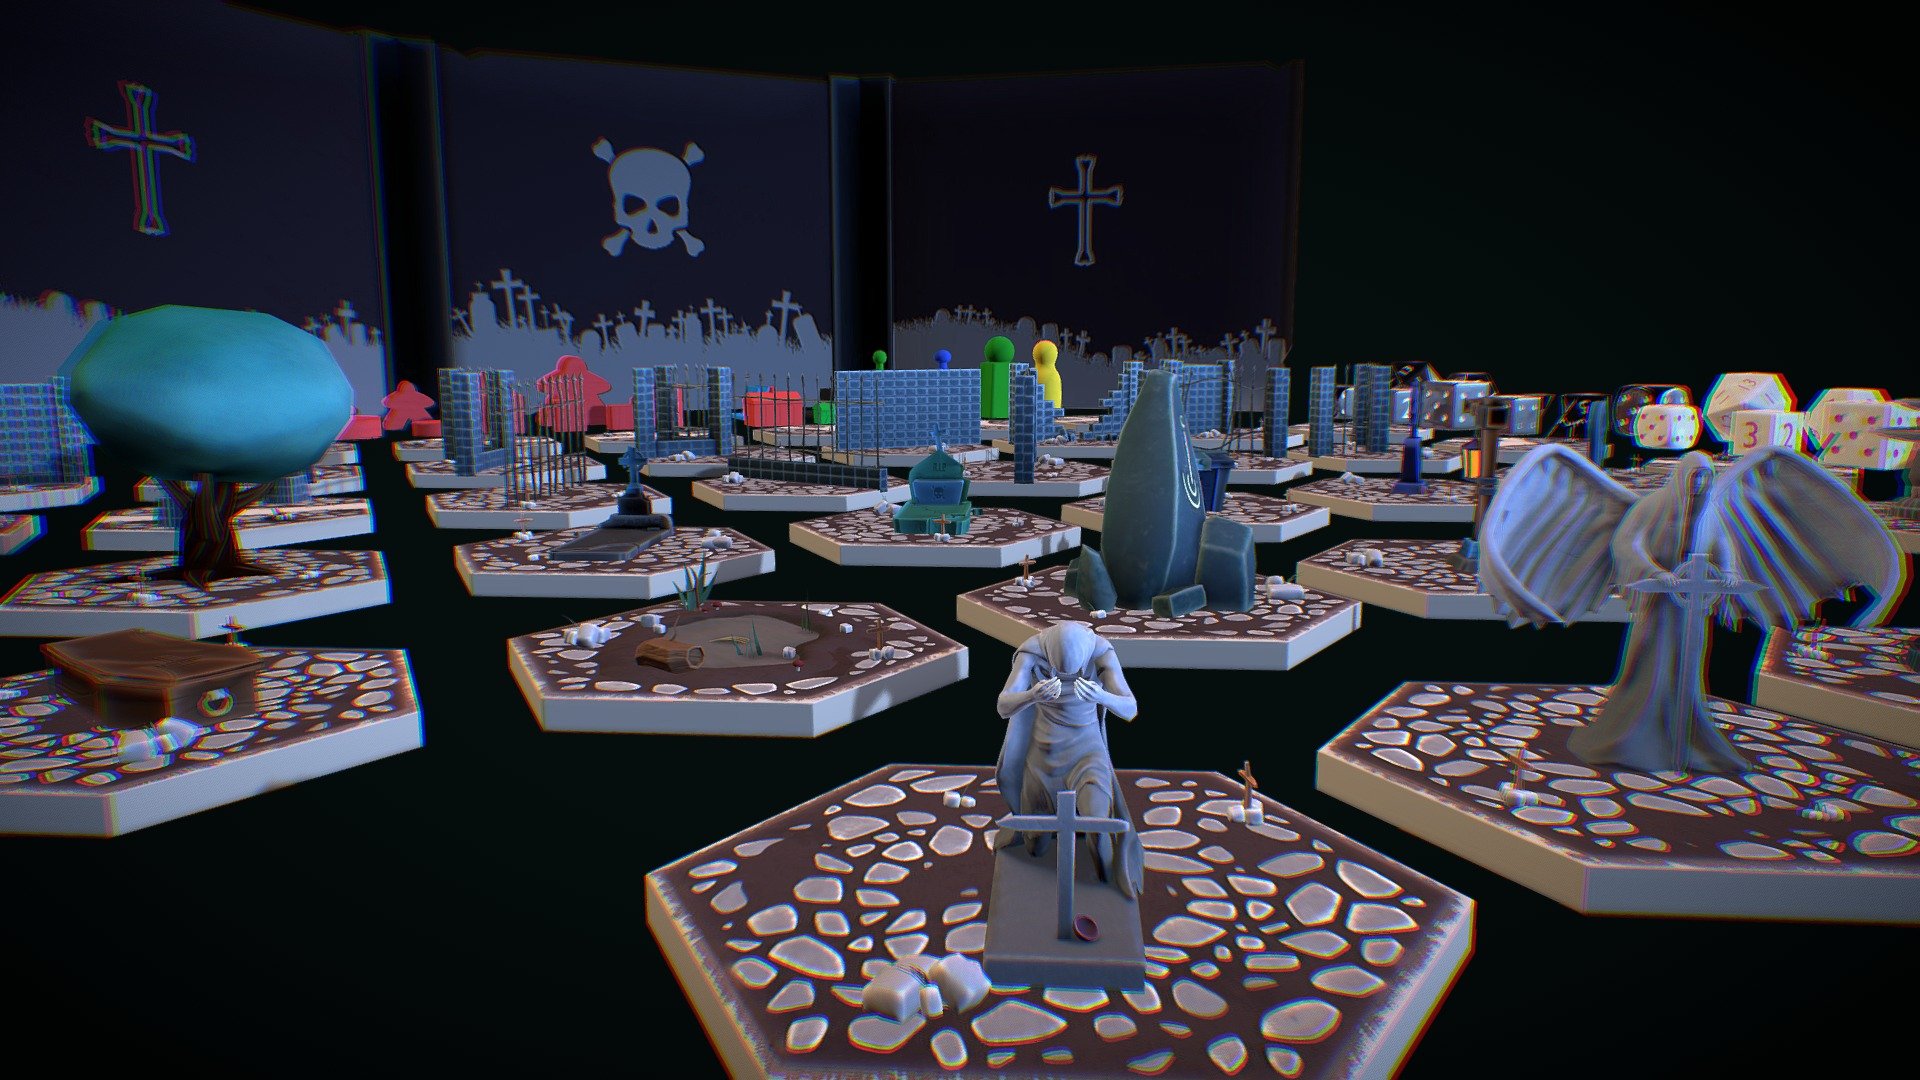 Cemetery themed hexagonal tiles modular pack

This is a hex-based model pack for development of board games which use cemetery as environment. The model pack contains a broad approach to the genre, featuring modular pieces of low-poly stylish assets for assembling a nice and smooth board game atmosphere. All of the featured assets can be assembled as the user pleases, including the hexes, the contents and all of the essential pieces like dices, pawns and houses. Every asset is modular, to be used in VR and traditional views.
the project has a level containing an overview of all included models.

https://youtu.be/R6Ihu-lGeqg

Features:
 79 unique models
 lowpoly game ready models
Number of Unique Meshes: 79 unique models
Number of Textures: 157 textures
Texture Resolutions: 2K - Boardgame Model Pack - Cemetery - Buy Royalty Free 3D model by Animus Game Studio (@animusgamestudio) 3d model